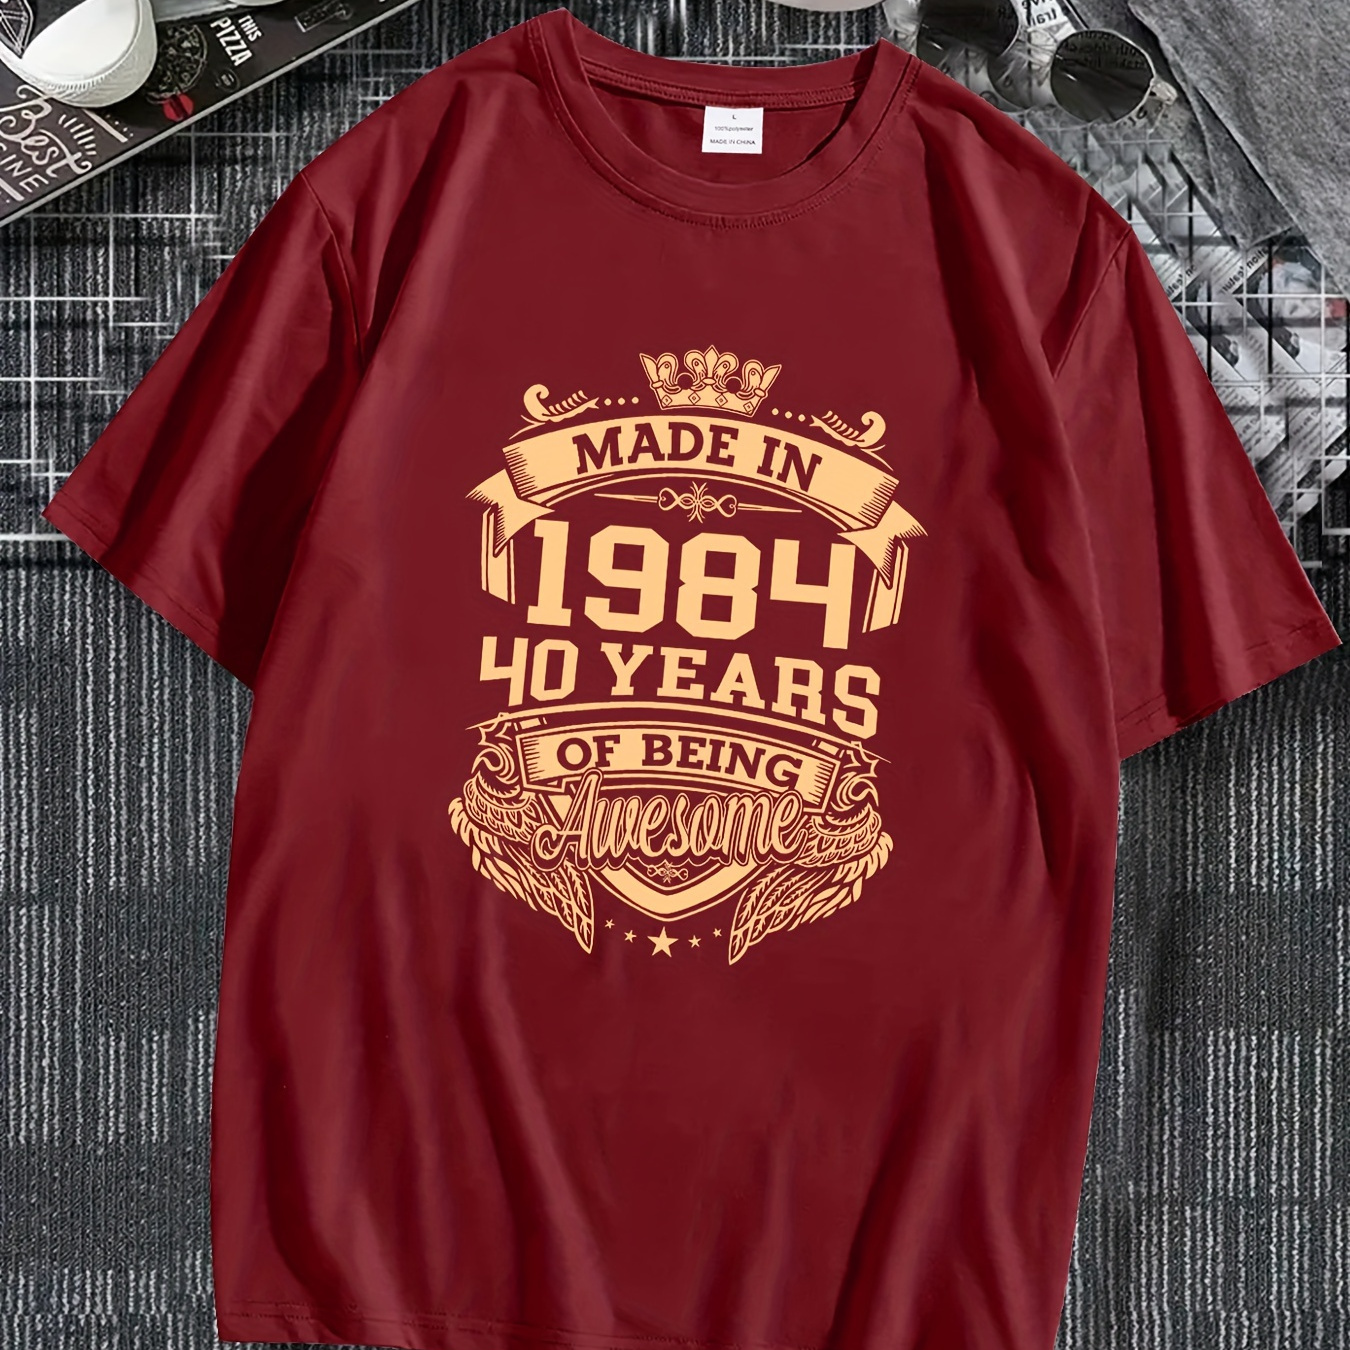 

Made In 1984 40 Years Print Tee Shirt, Tees For Men, Casual Short Sleeve T-shirt For Summer